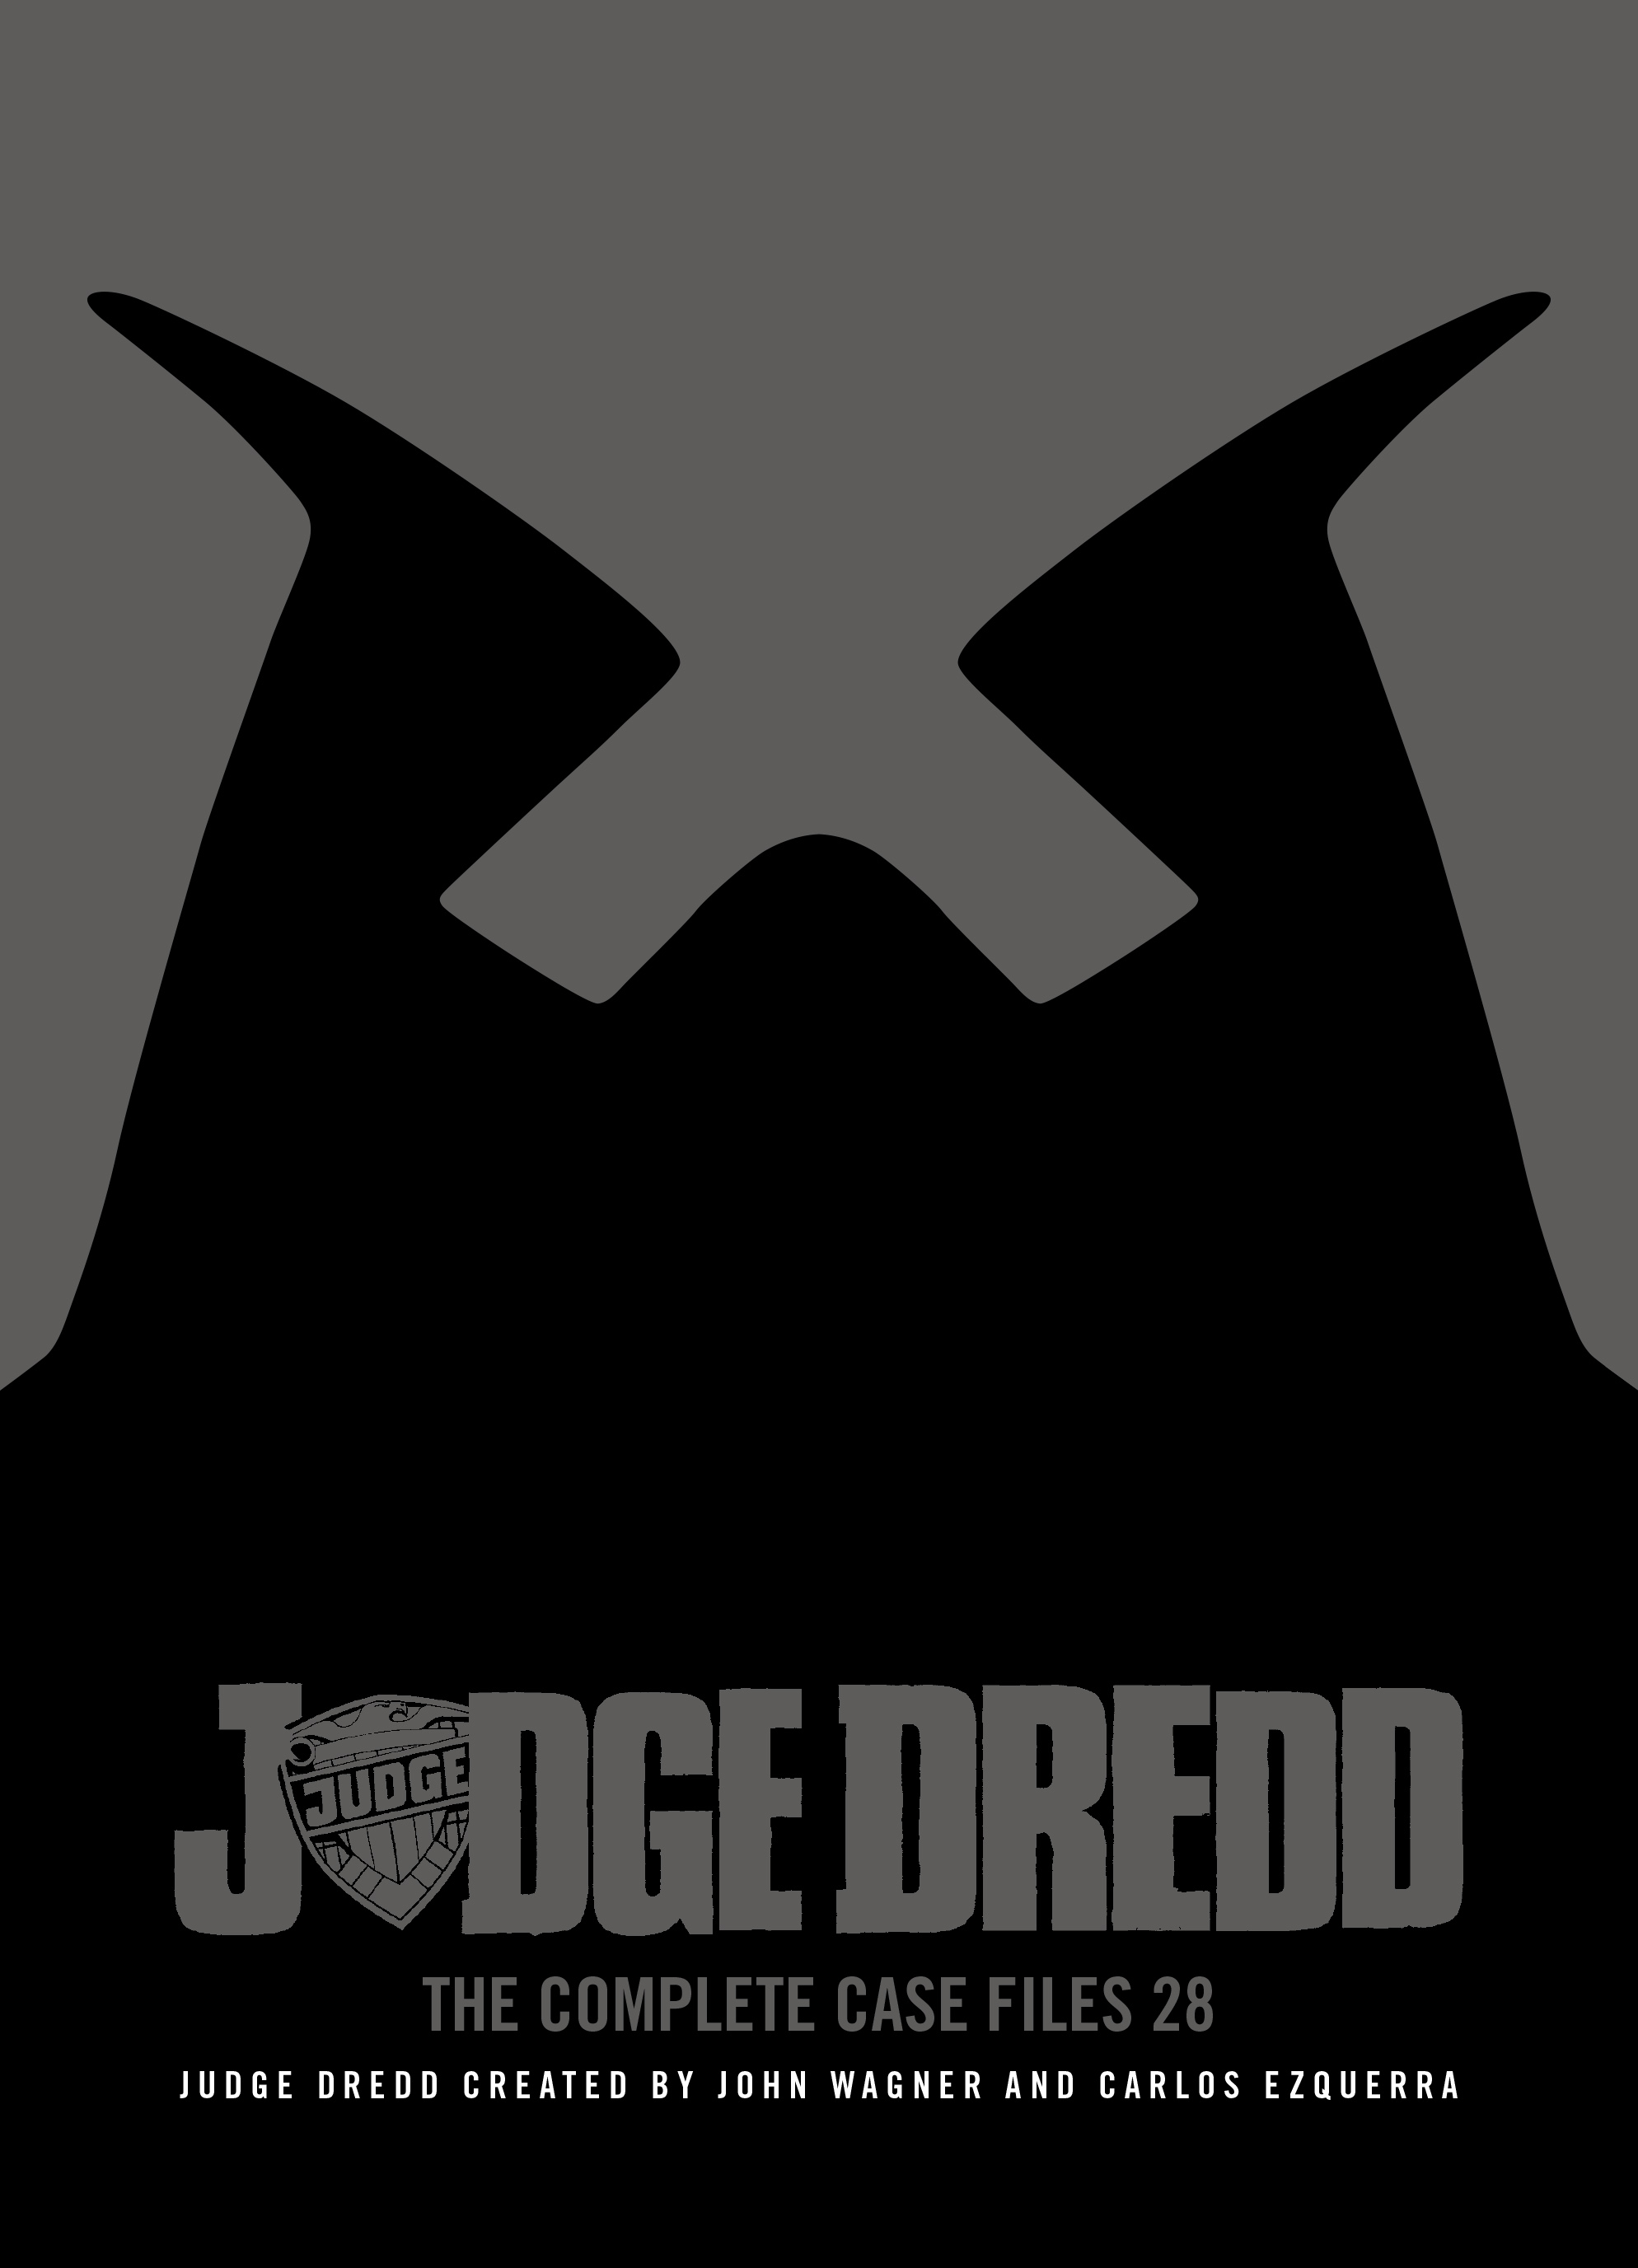 Read online Judge Dredd: The Complete Case Files comic -  Issue # TPB 28 - 3